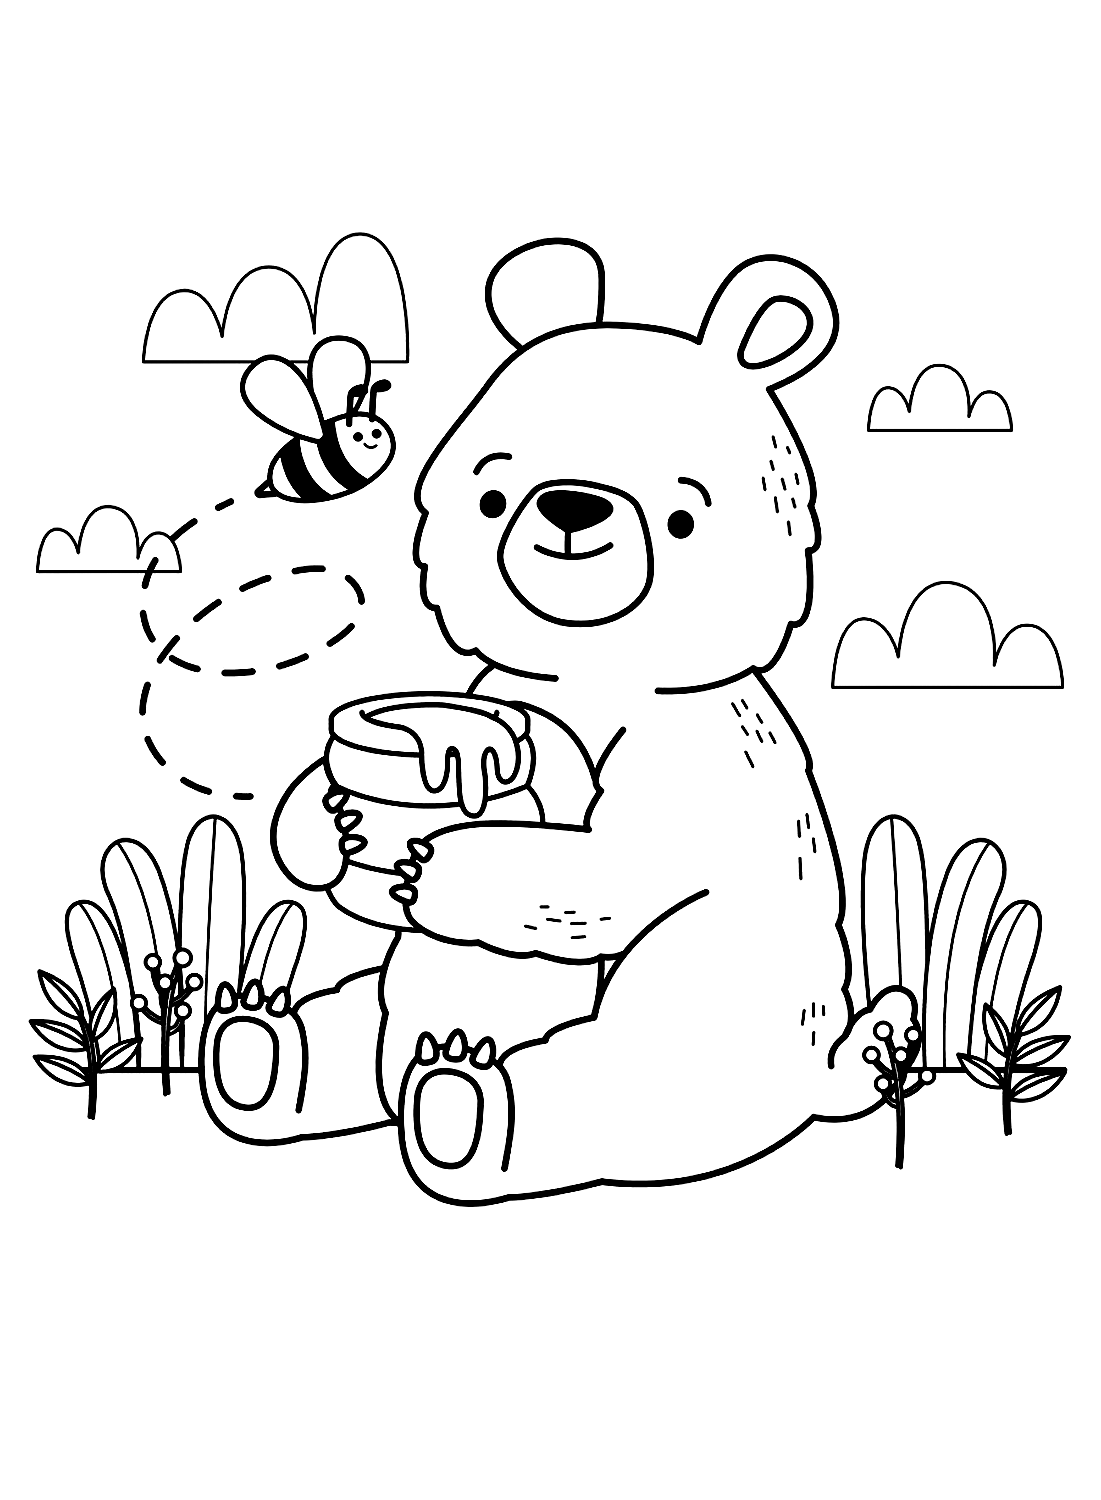 Bee and Teddy bear coloring pages for kids